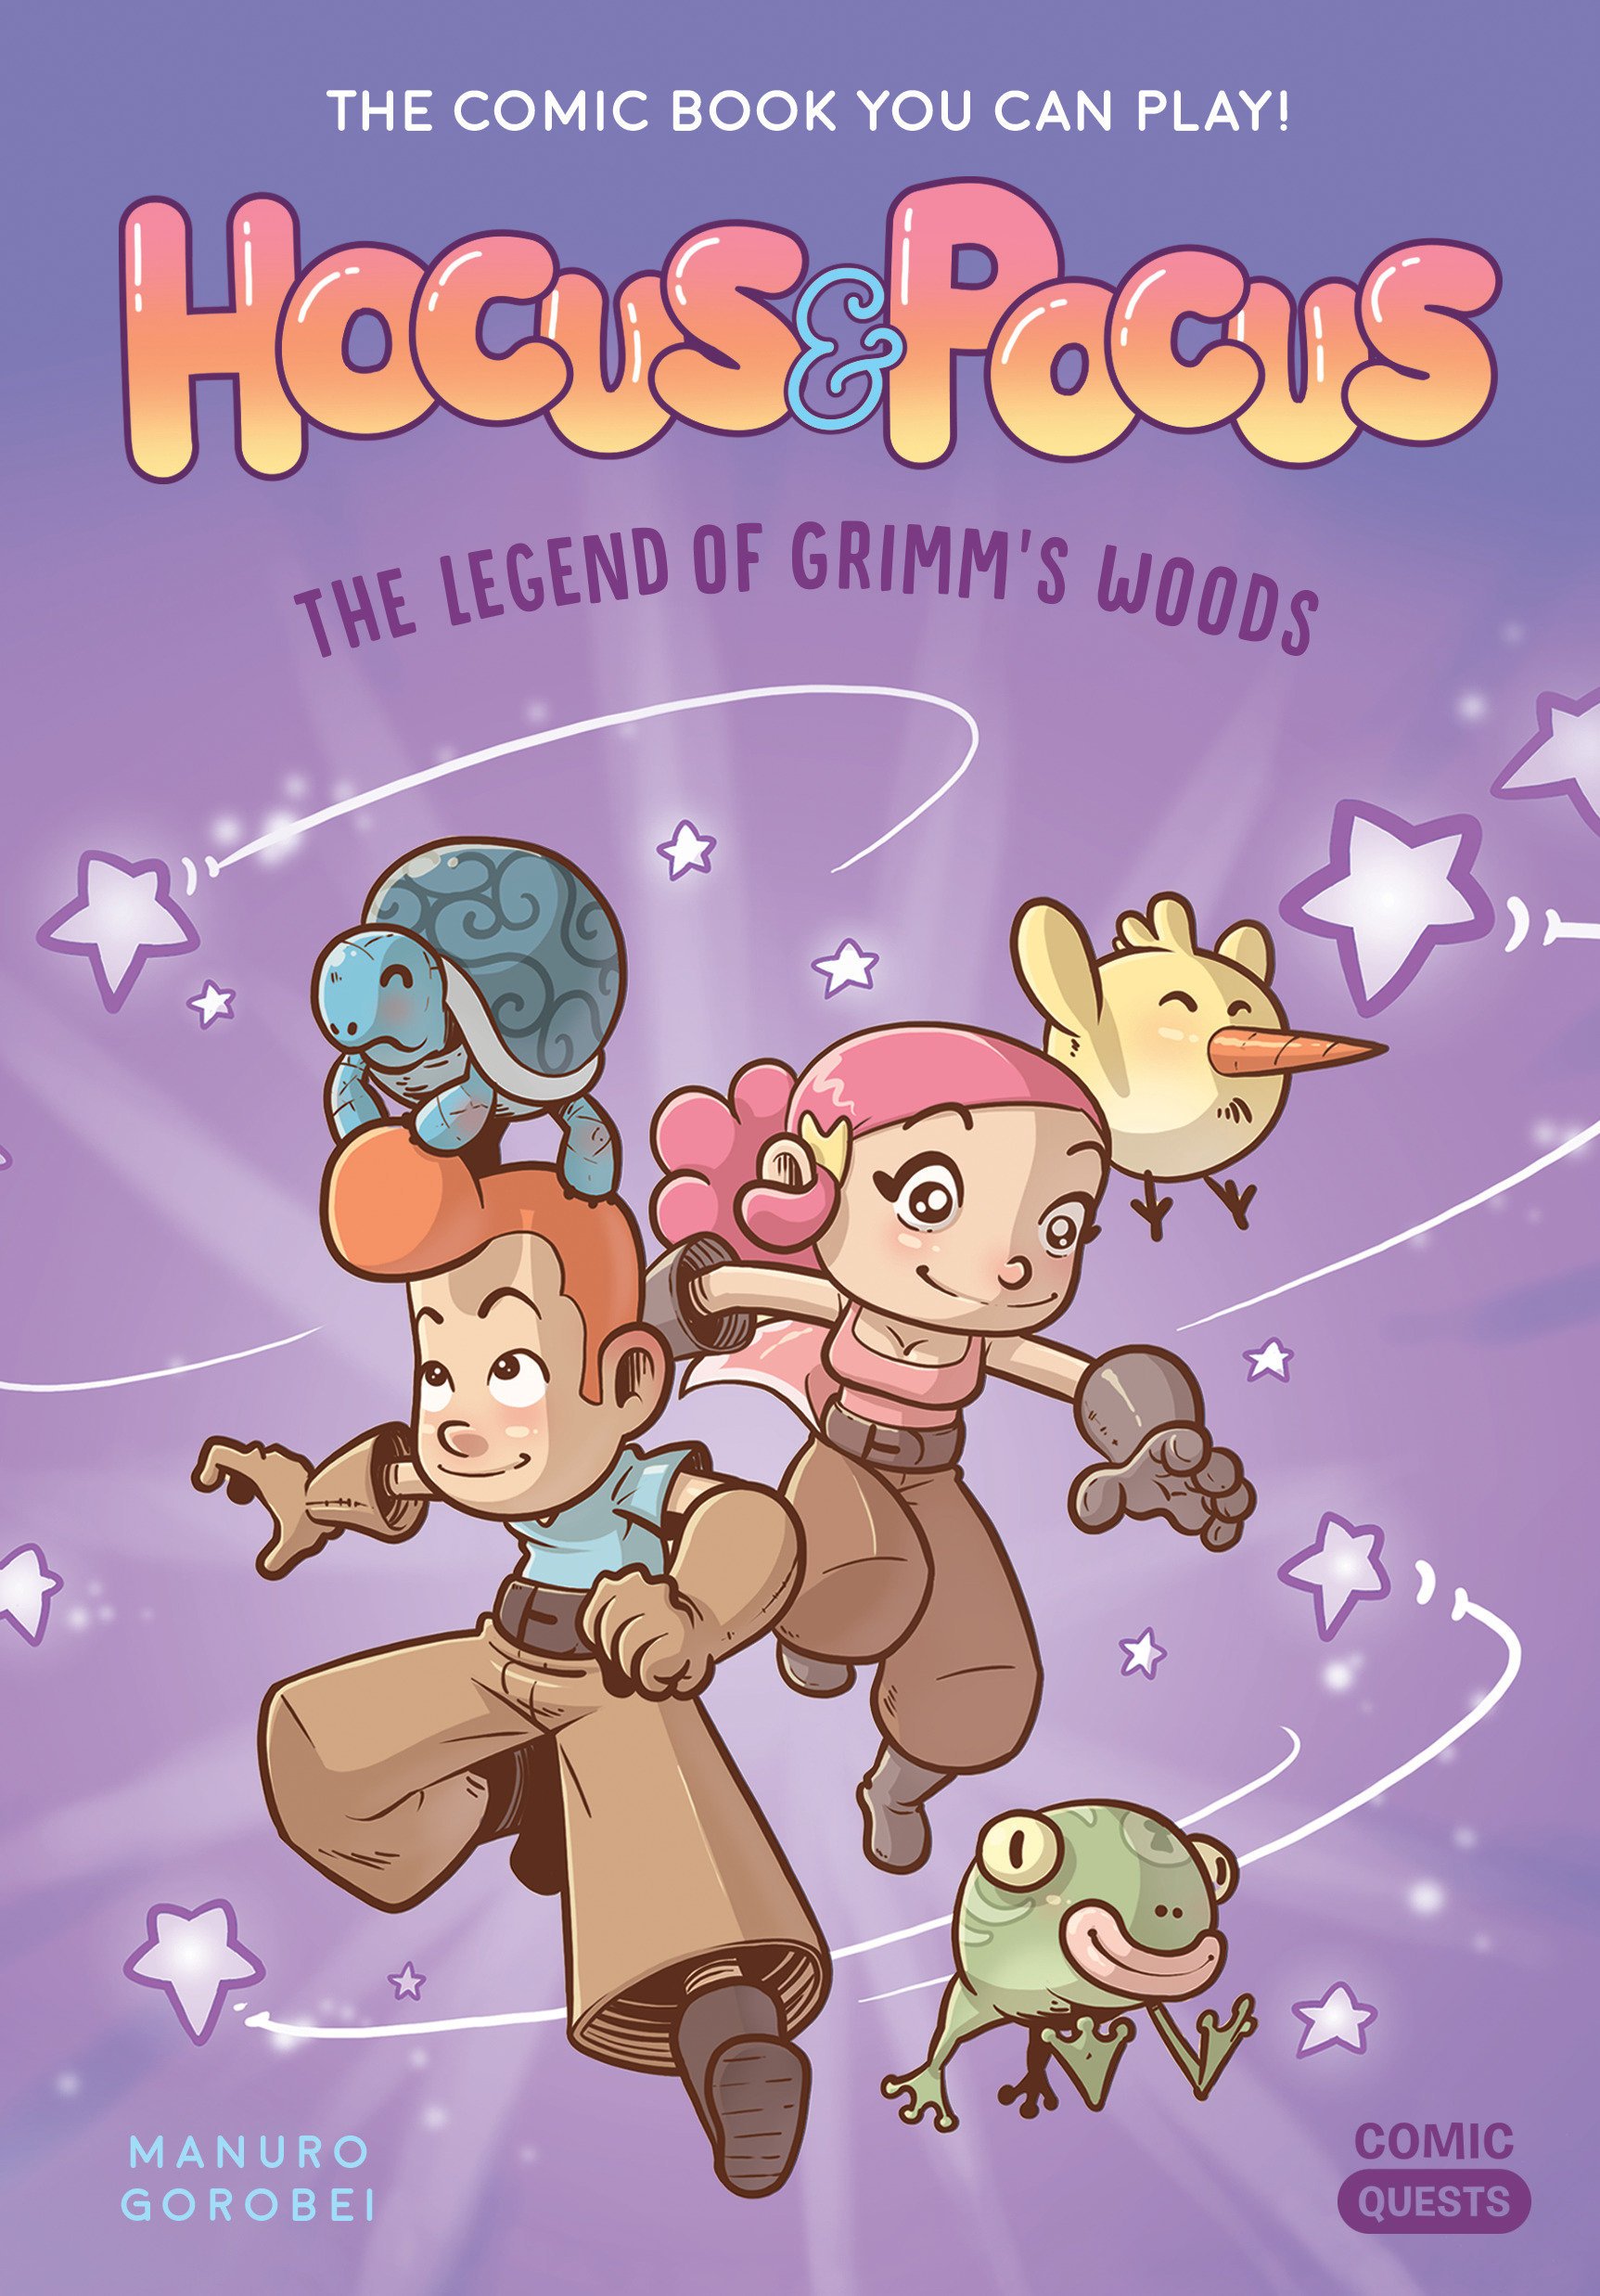 Hocus & Pocus: The Legend of Grimm's Woods: The Comic Book You Can Play (Comic Quests)